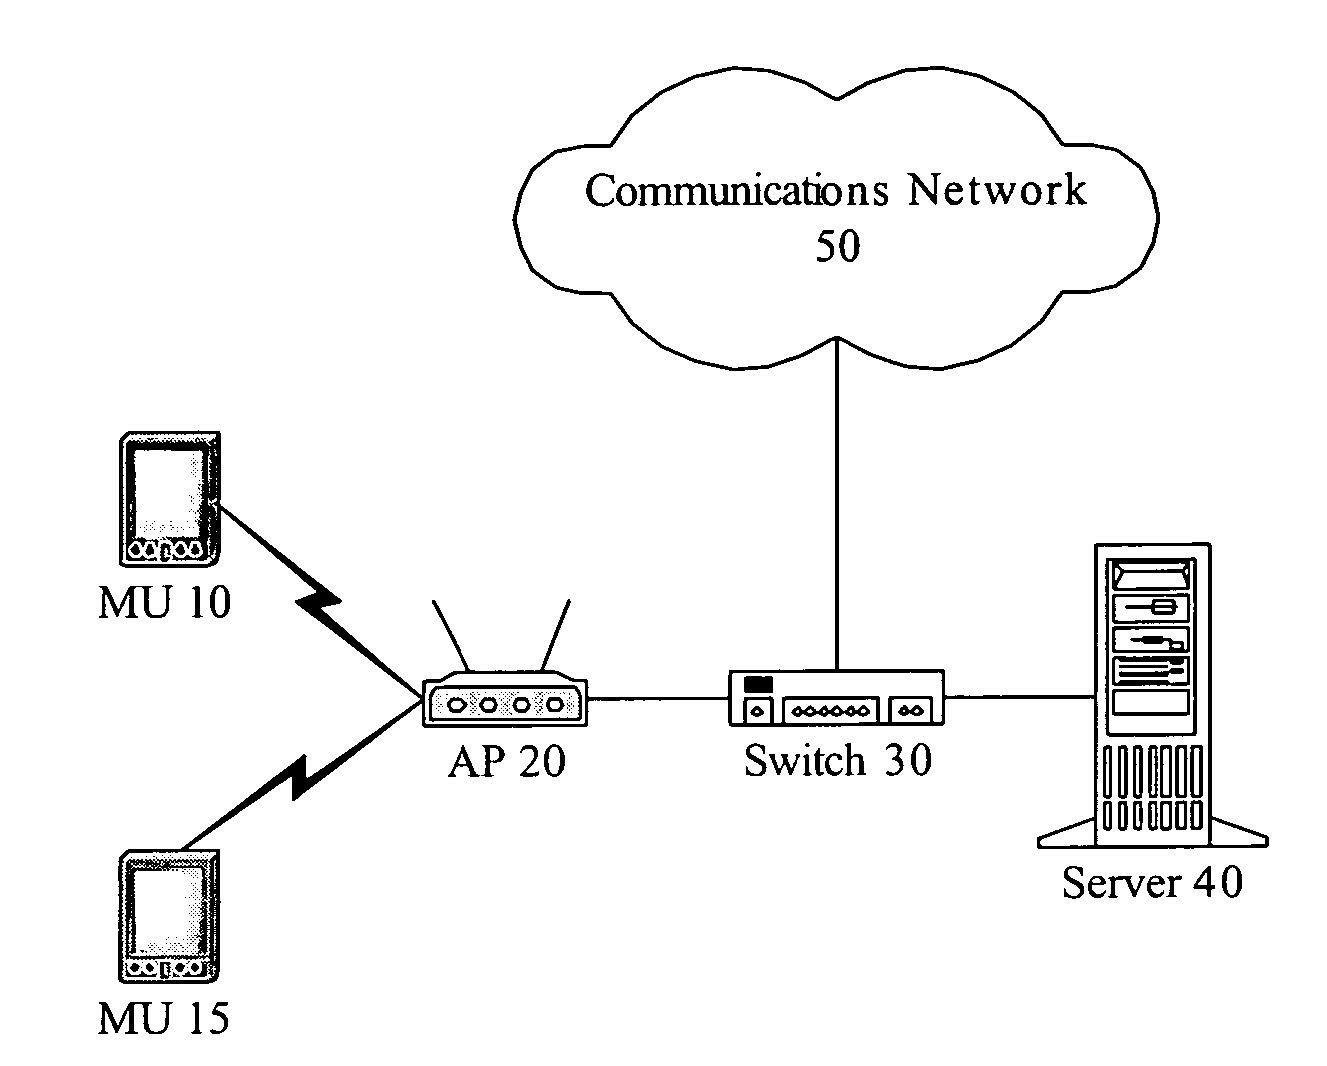 System and method for providing differentiated service levels to wireless devices in a wireless network